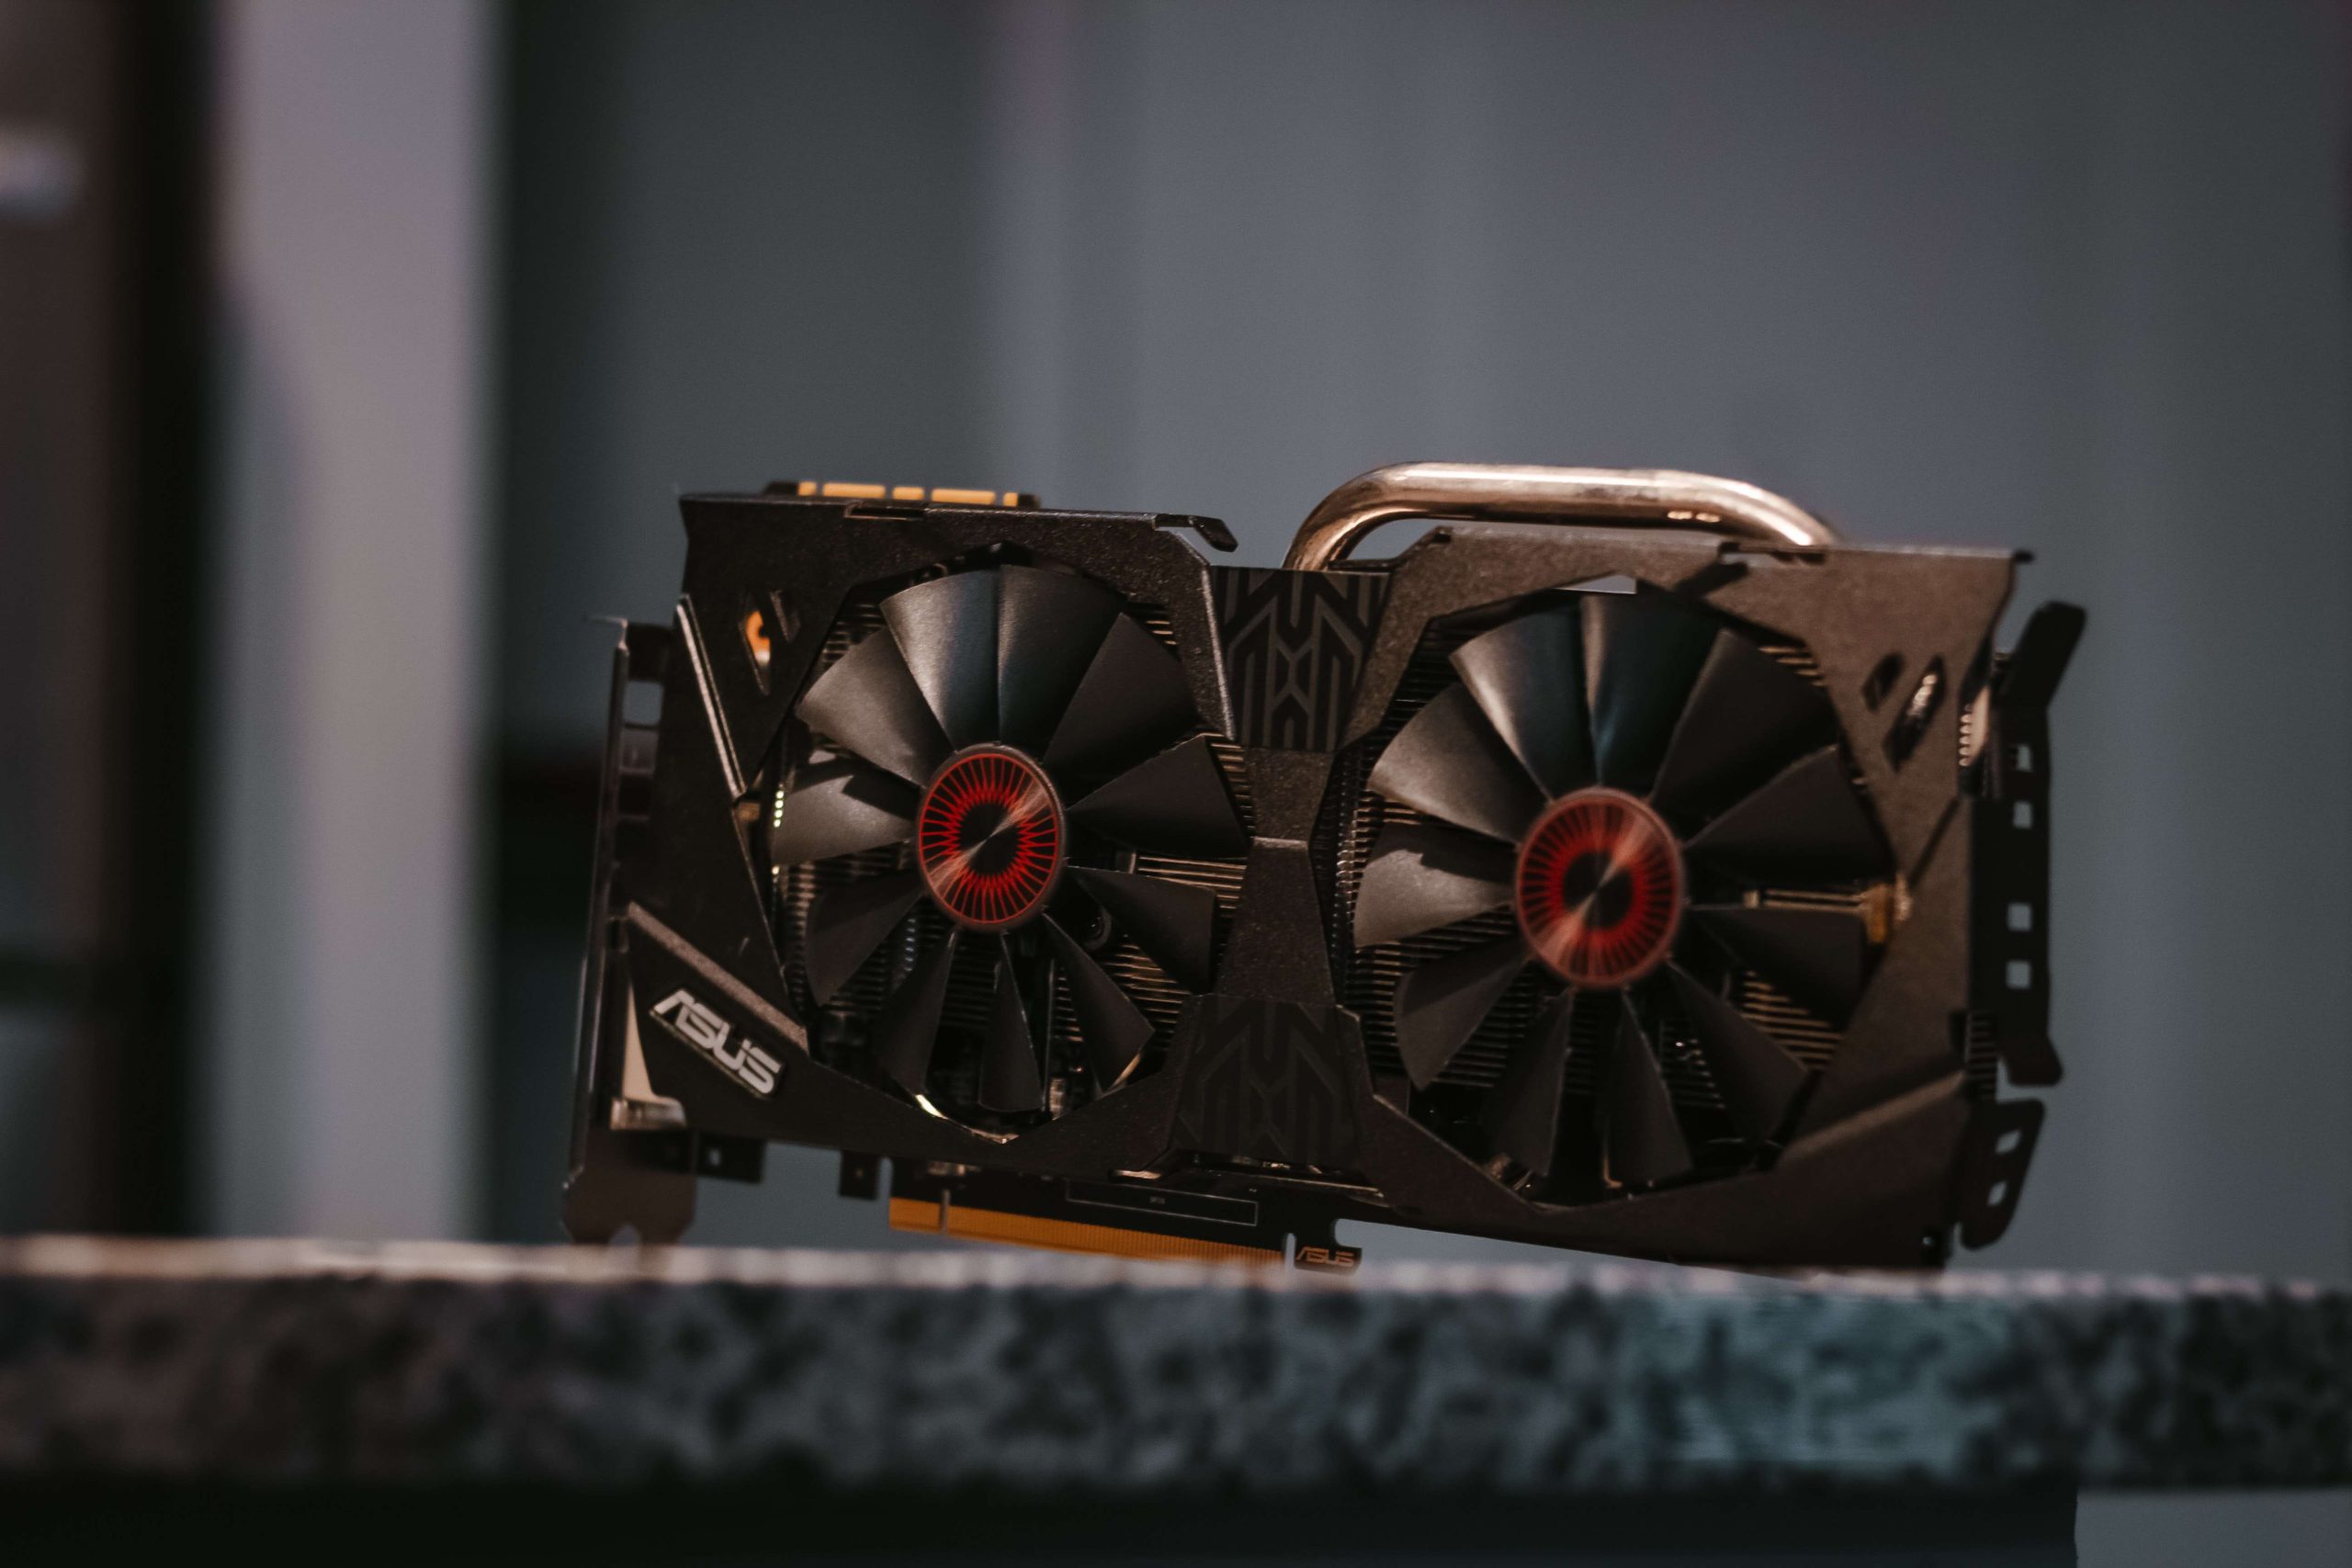 TOP 10 REASONS WHY GRAPHICS CARDS ARE EXPENSIVE